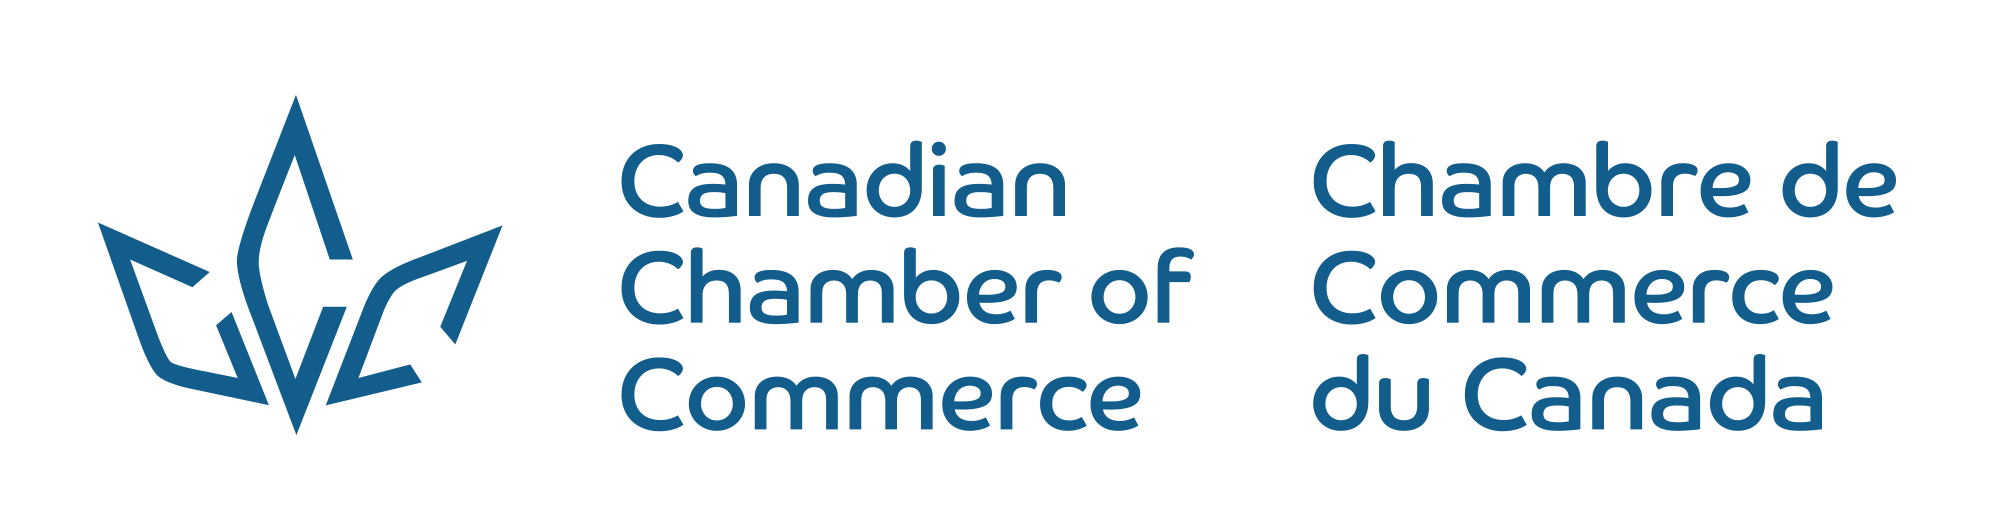 canadian chamber 2020